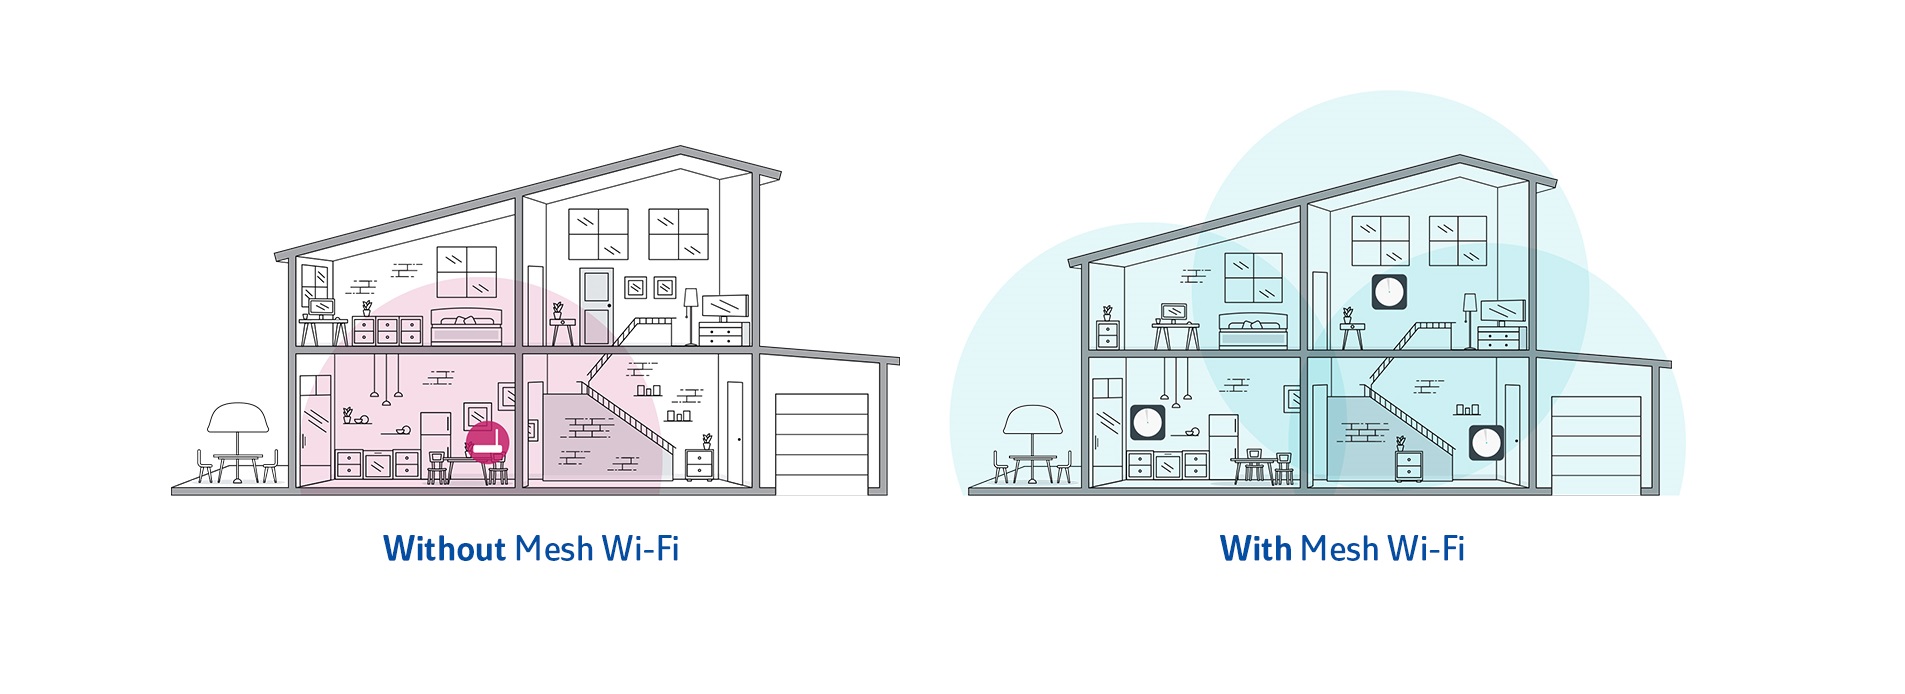 Image comparison of house with mesh and without mesh WiFi